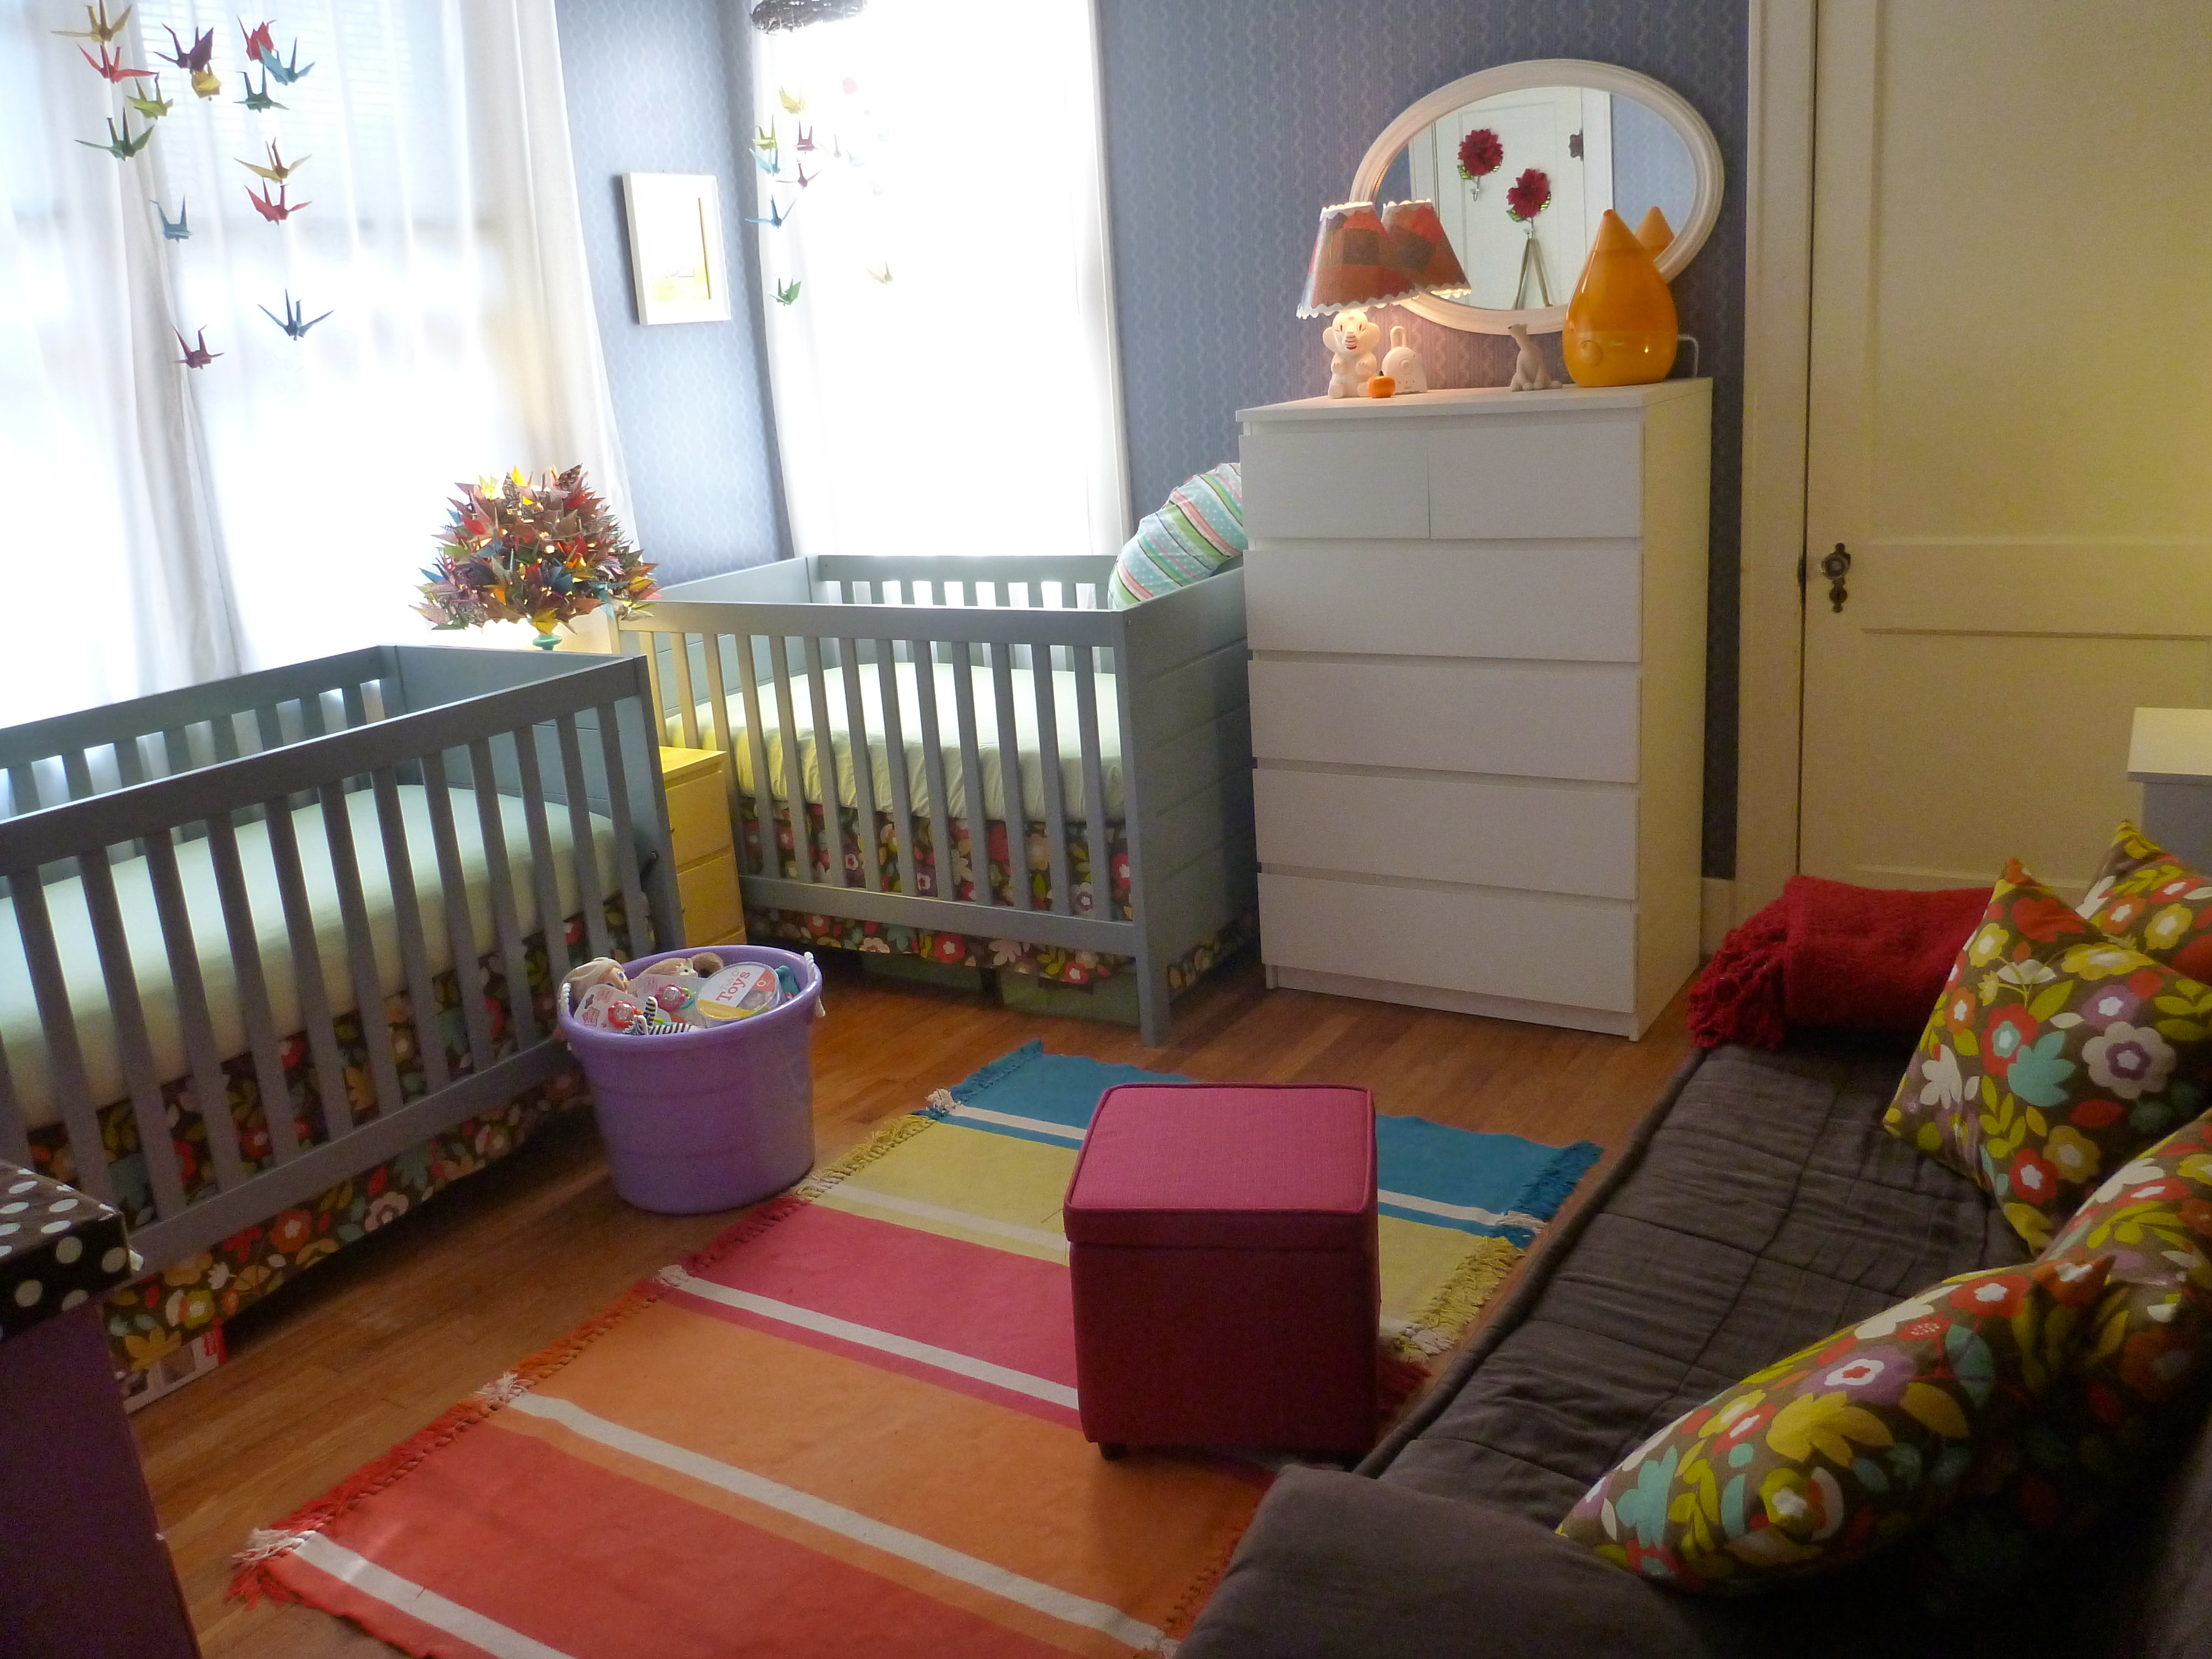 futon for baby room